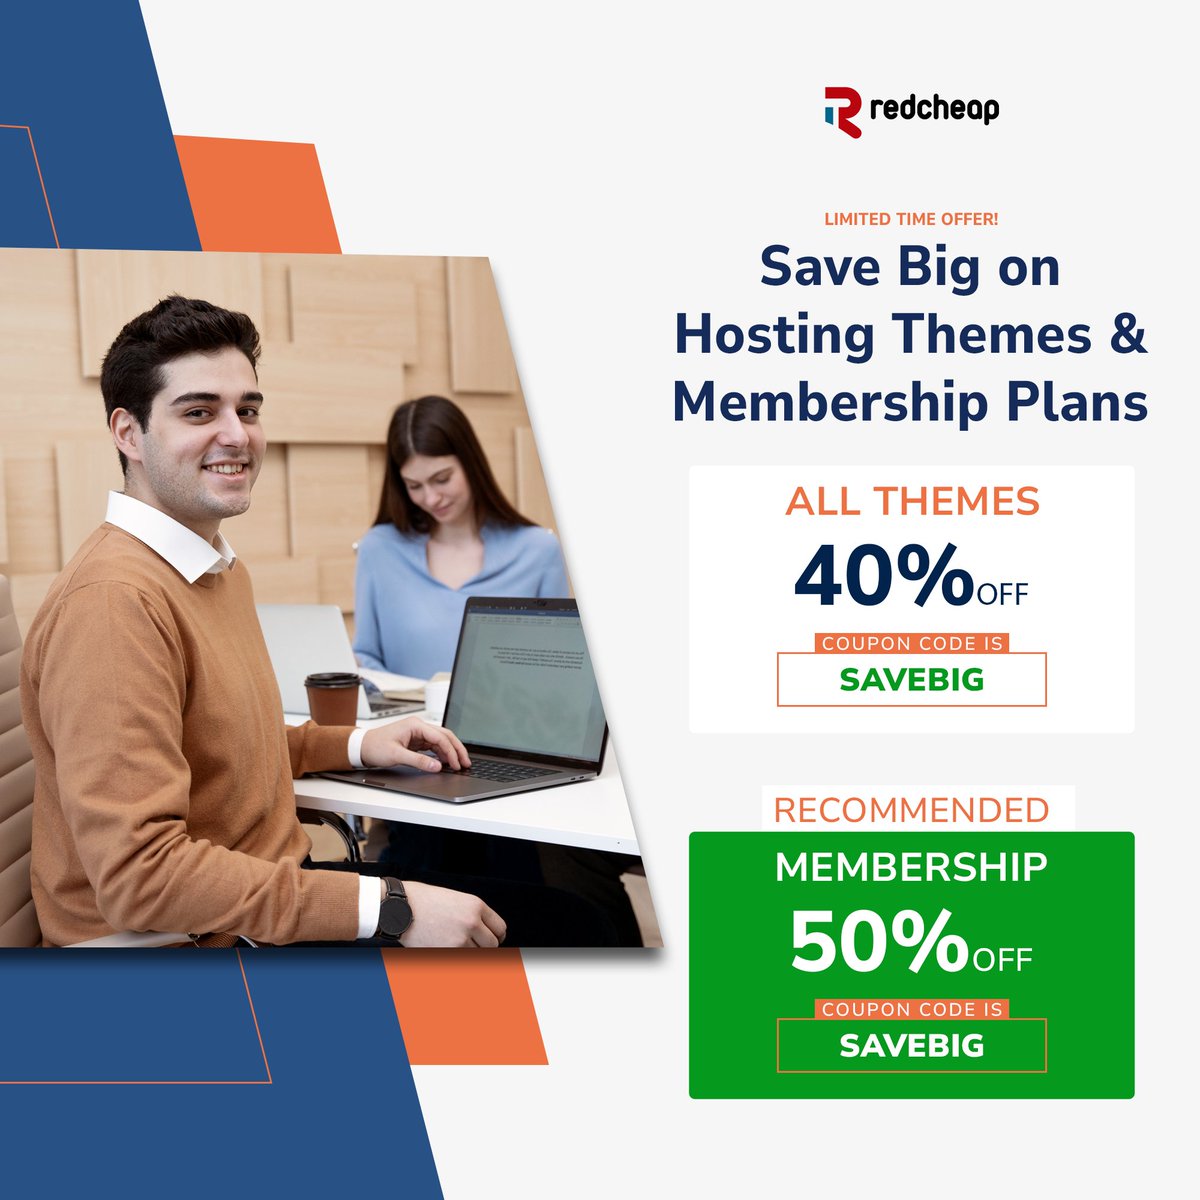 🌟 Limited Time Offer Alert! ✨ Get up to 40% off on our WHMCS, SuperSite, HTML, PartnerSite, and WordPress Themes, and enjoy a whopping 50% discount on our Membership Plans! Don't miss out - use code SAVEBIG. 🛒🔖 #WebHosting #DiscountOffer #LimitedTime #UpgradeNow